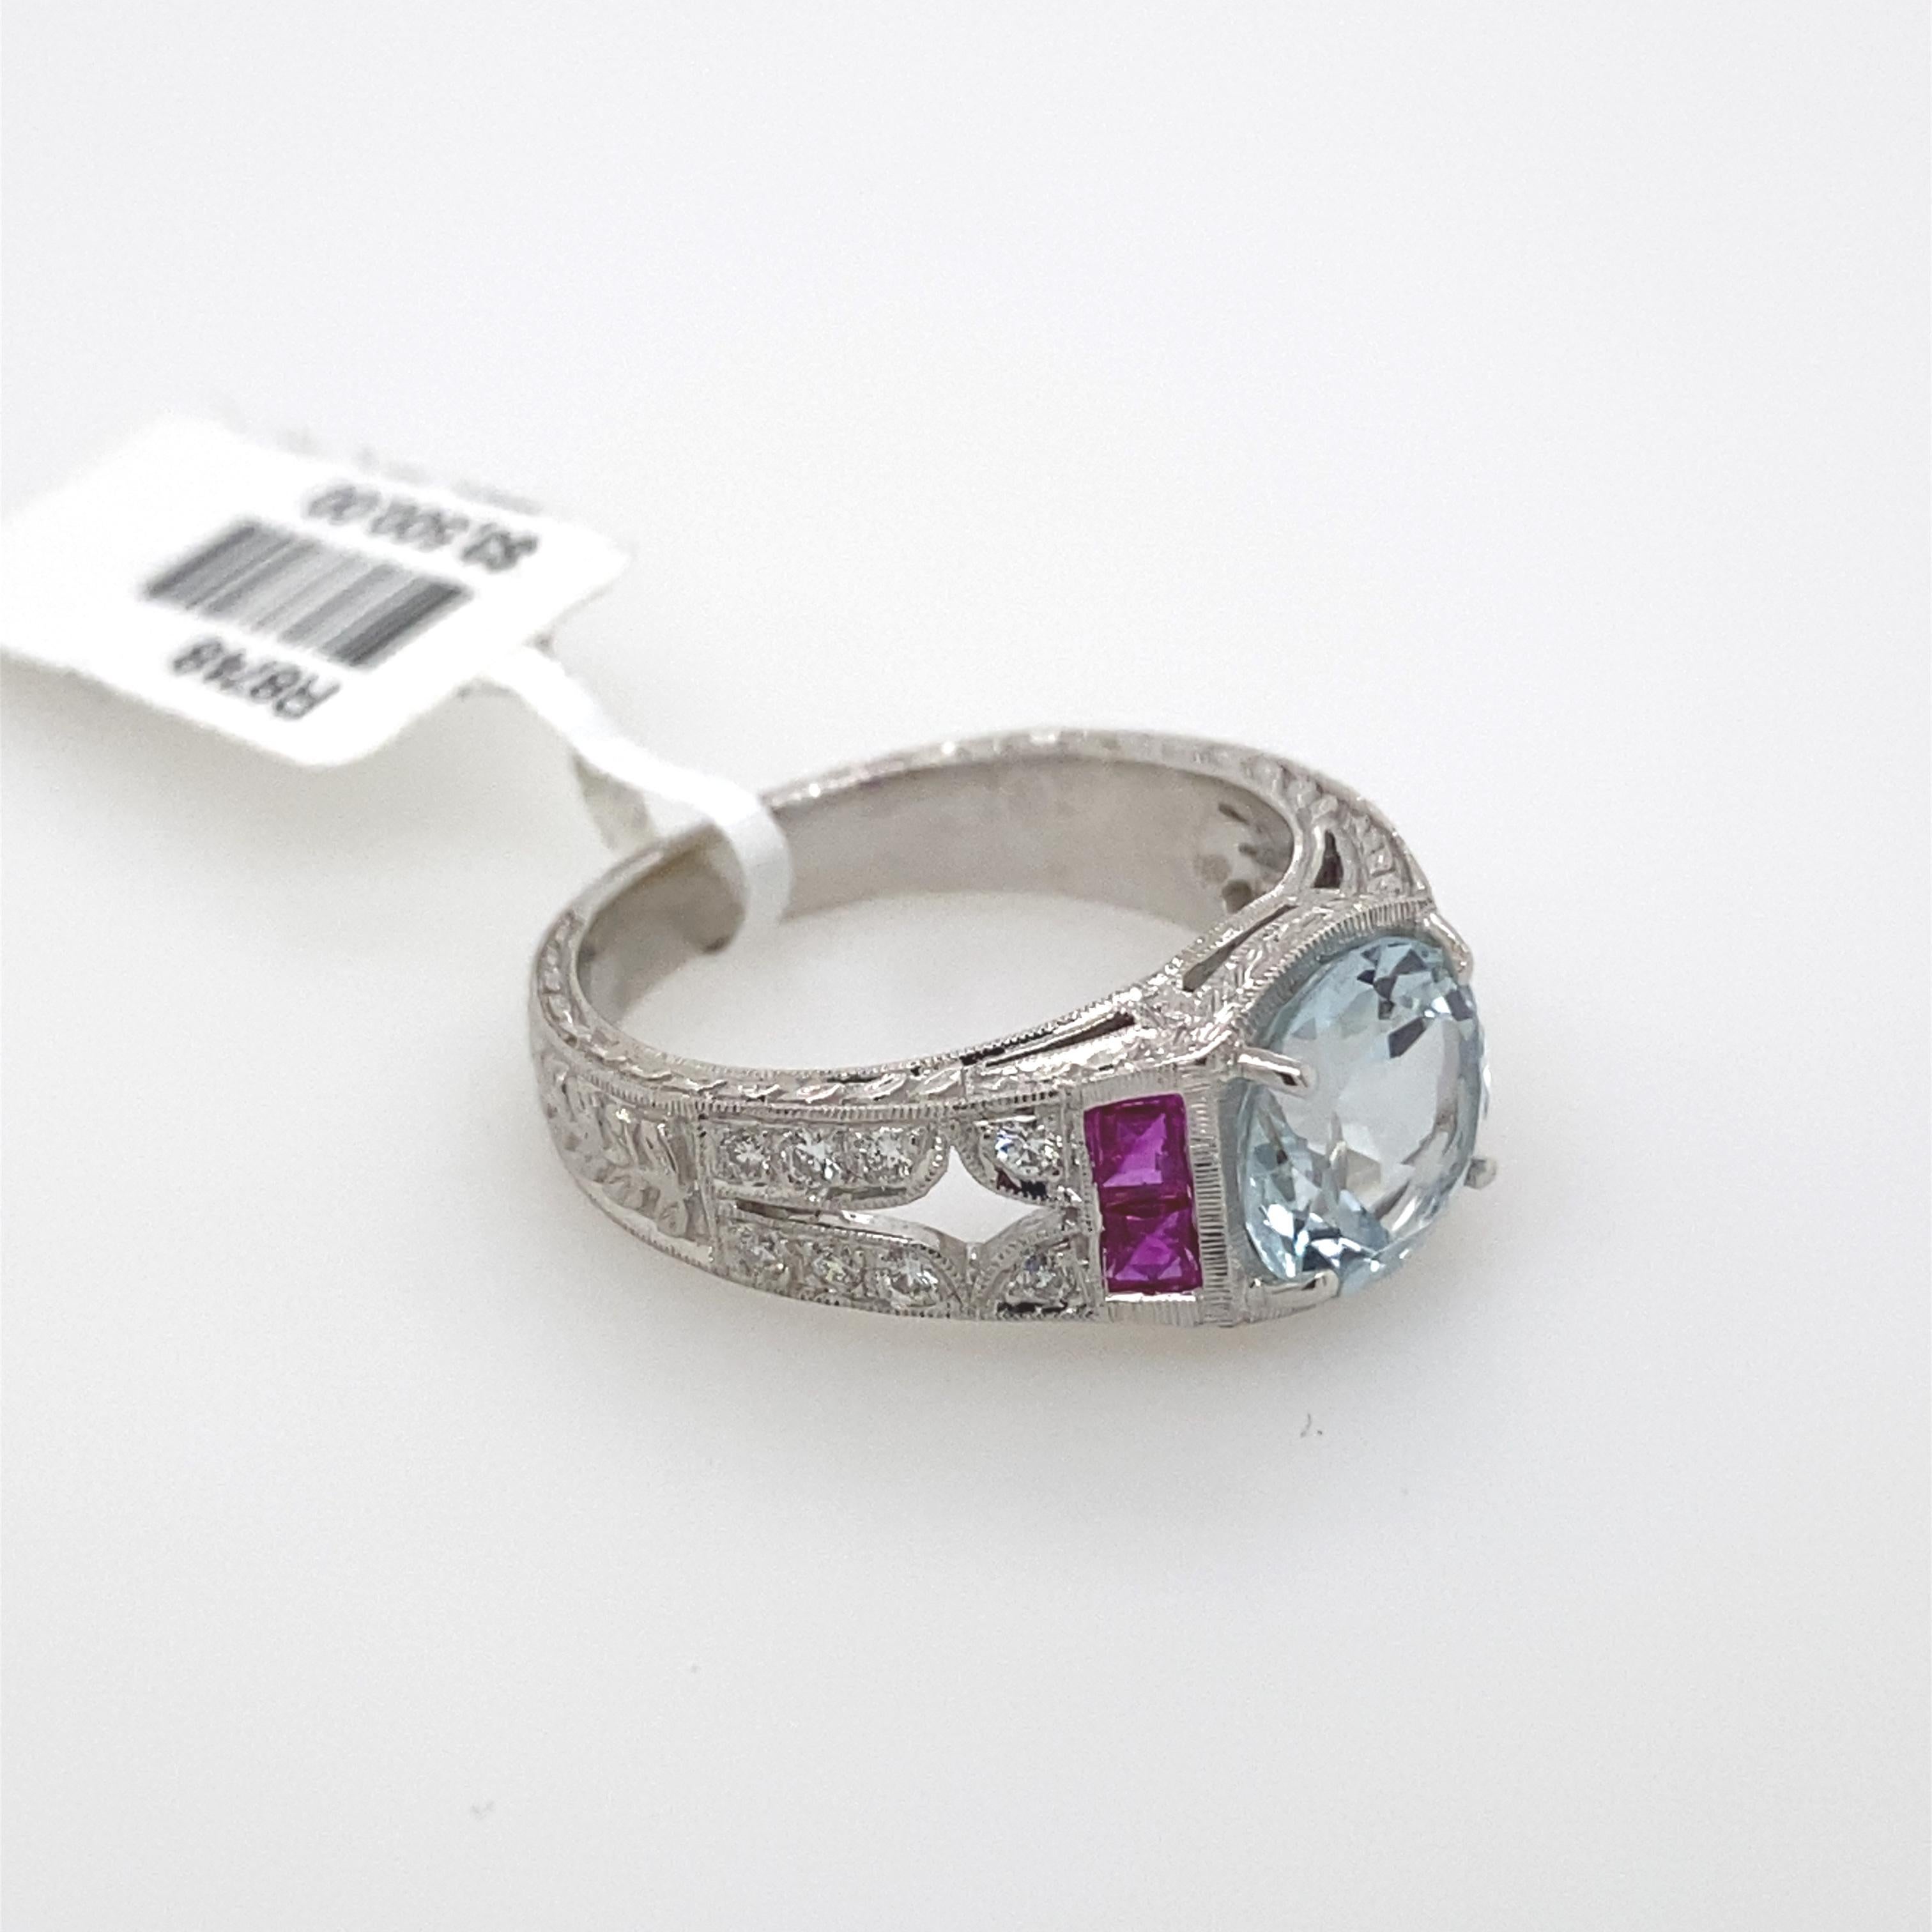 Art Deco inspired ring aquamarine ring. 
2.00ct center round cut aquamarine. Complimented with 0.83ct of French cut rubies and 0.16ct of round cut diamonds. 2.99ct total gemstone weight. 18k white gold with milgrain and filigree work.
Accommodated